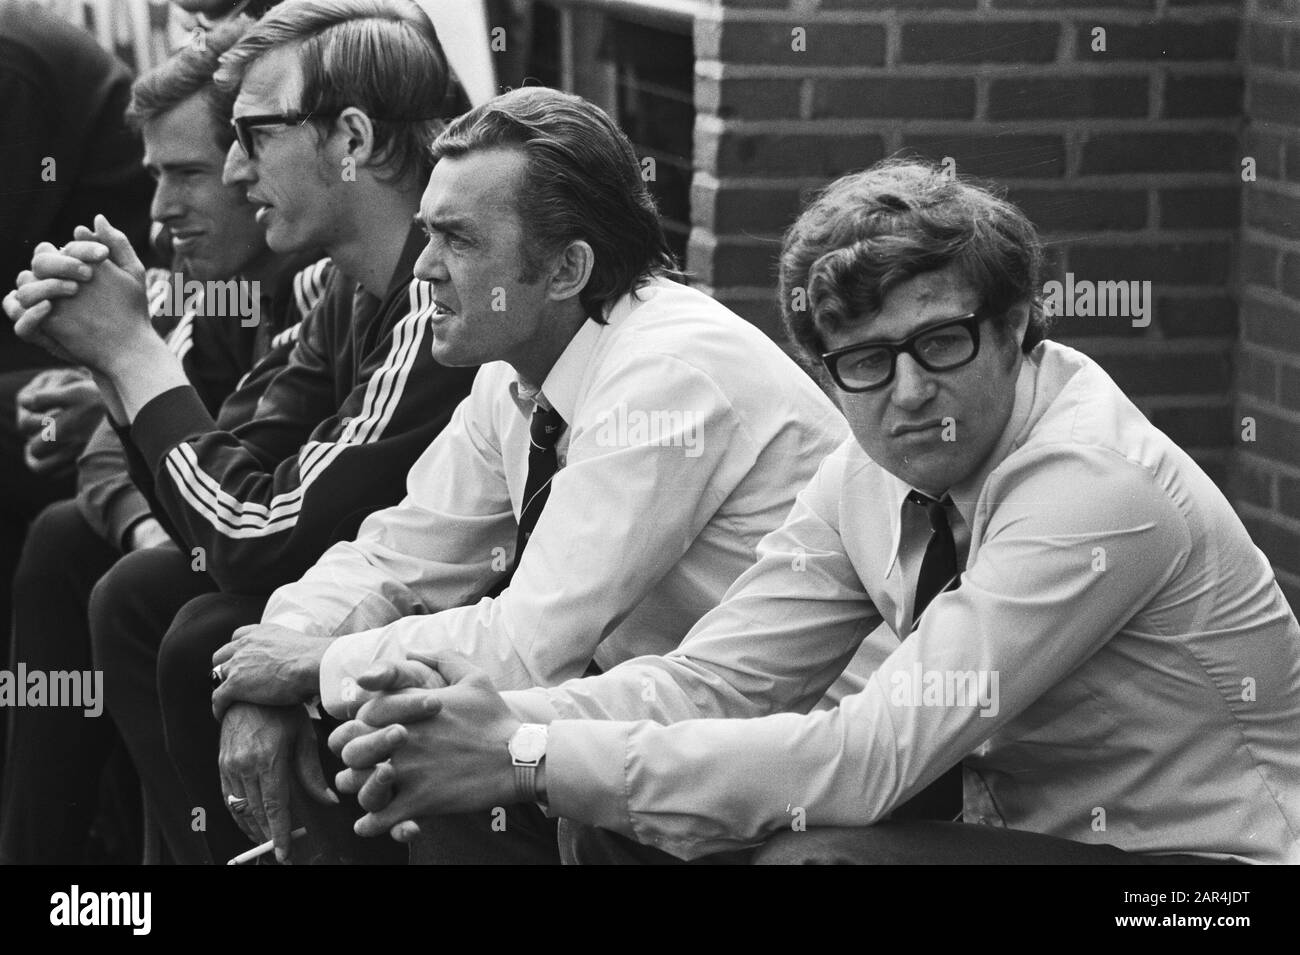 NAC against Feyenoord 1-3  Dug-out of Feyenoord during the match; second of r trainer Ernst Happel Date: 16 May 1971 Location: Breda, Noord-Brabant Keywords: sport, trainers, football, footballers, matches Personal name: Happel, Ernst Institution name: Feyenoord Stock Photo